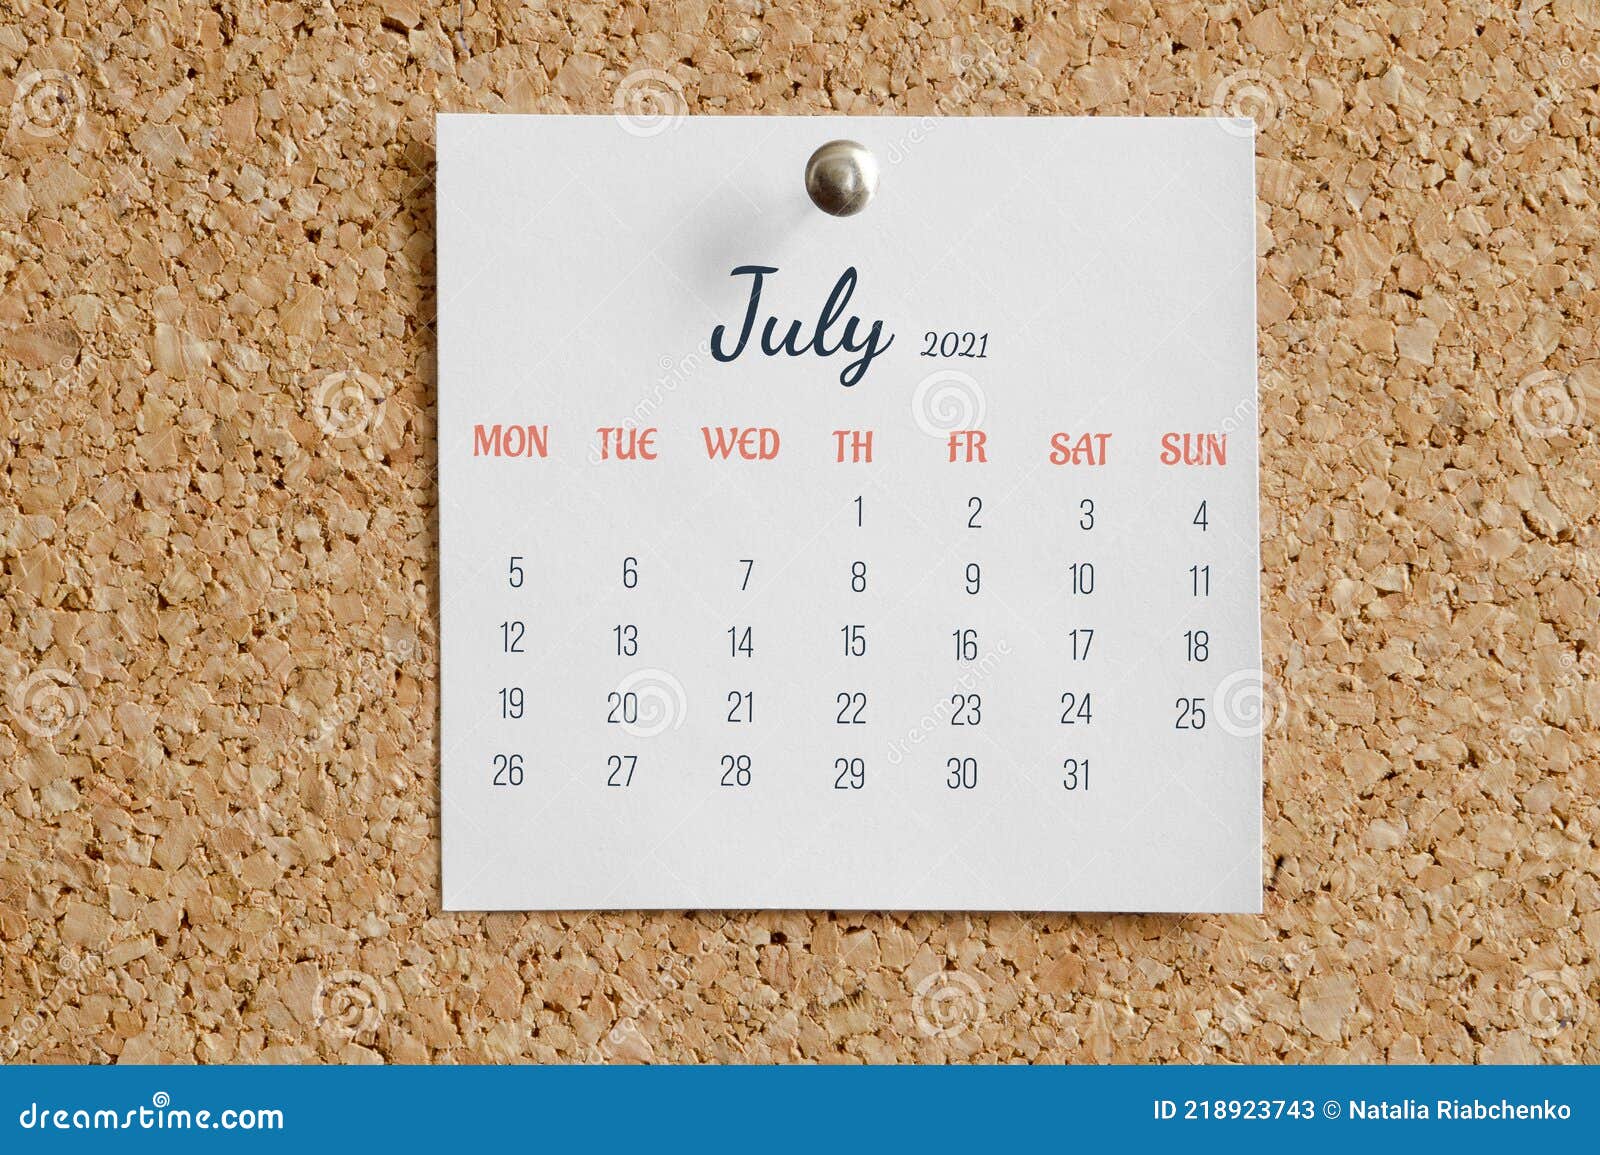 page from calendar for full month: june 2021. white sheet with dates is pinned to cork board. concept of calendar date